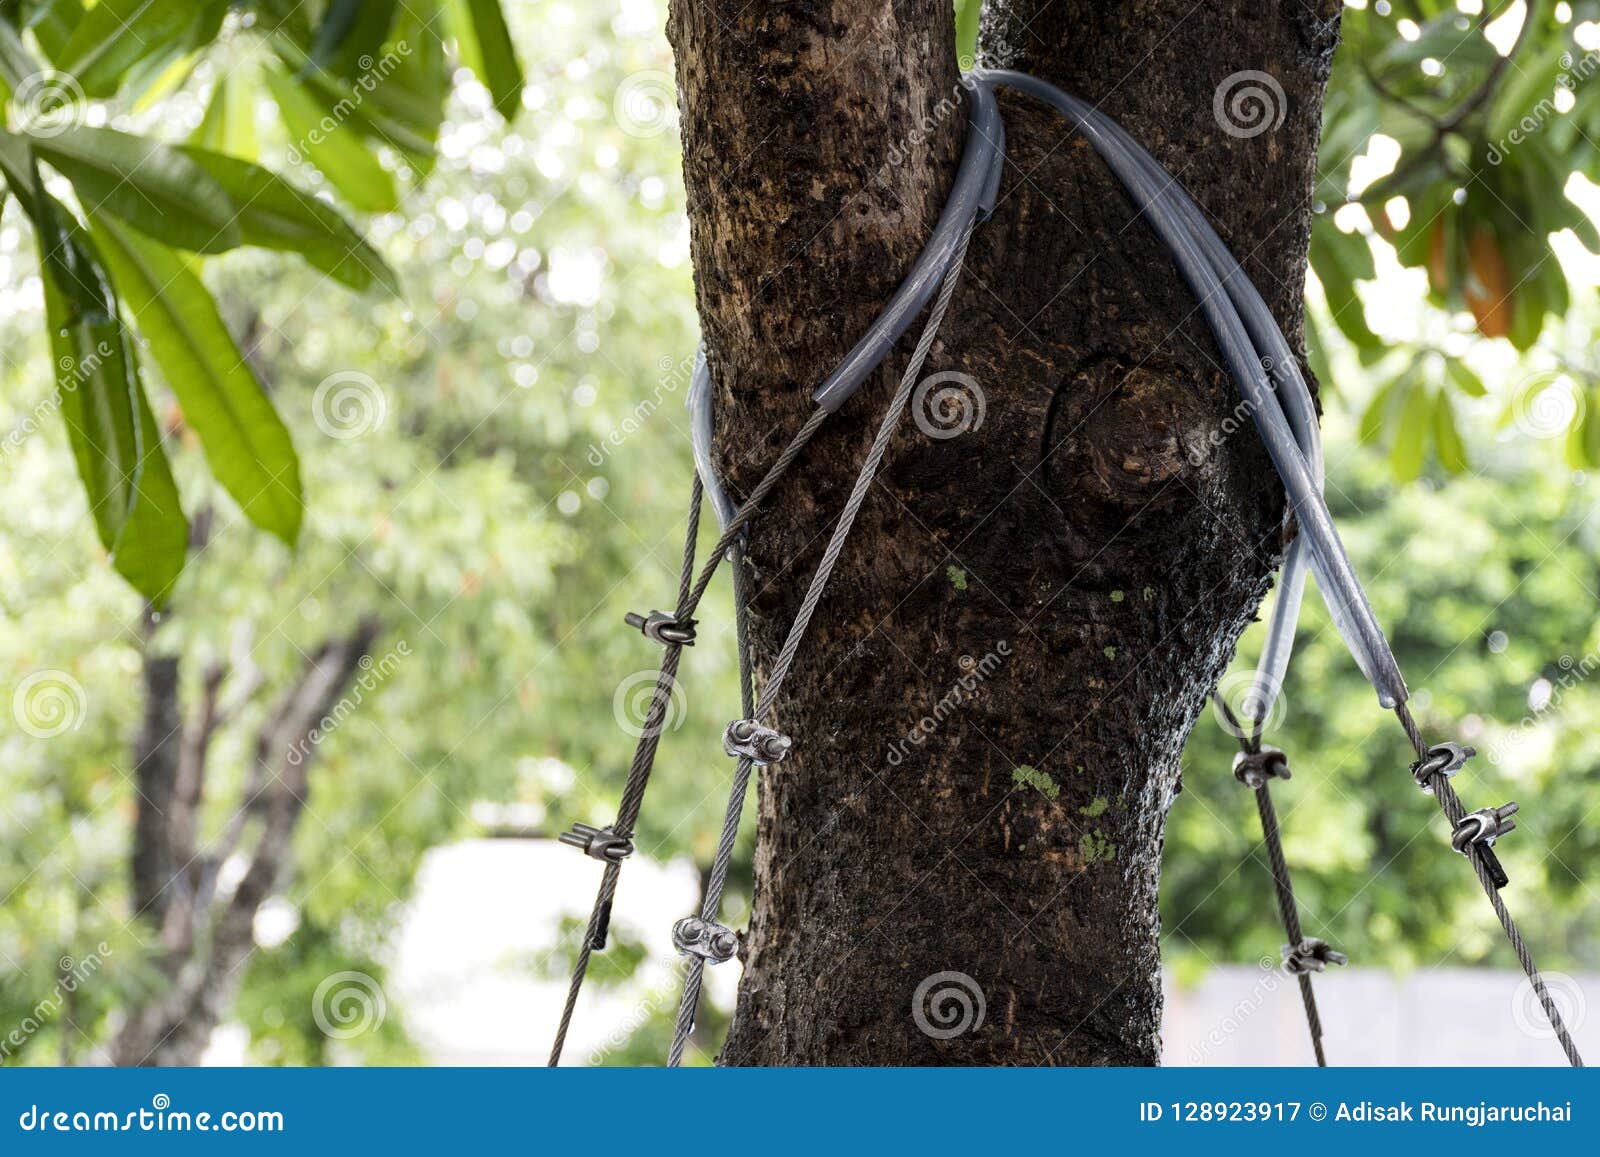 https://thumbs.dreamstime.com/z/rope-tied-around-tree-trunk-front-blurred-natural-background-close-up-rope-tied-around-tree-trunk-front-blurred-128923917.jpg